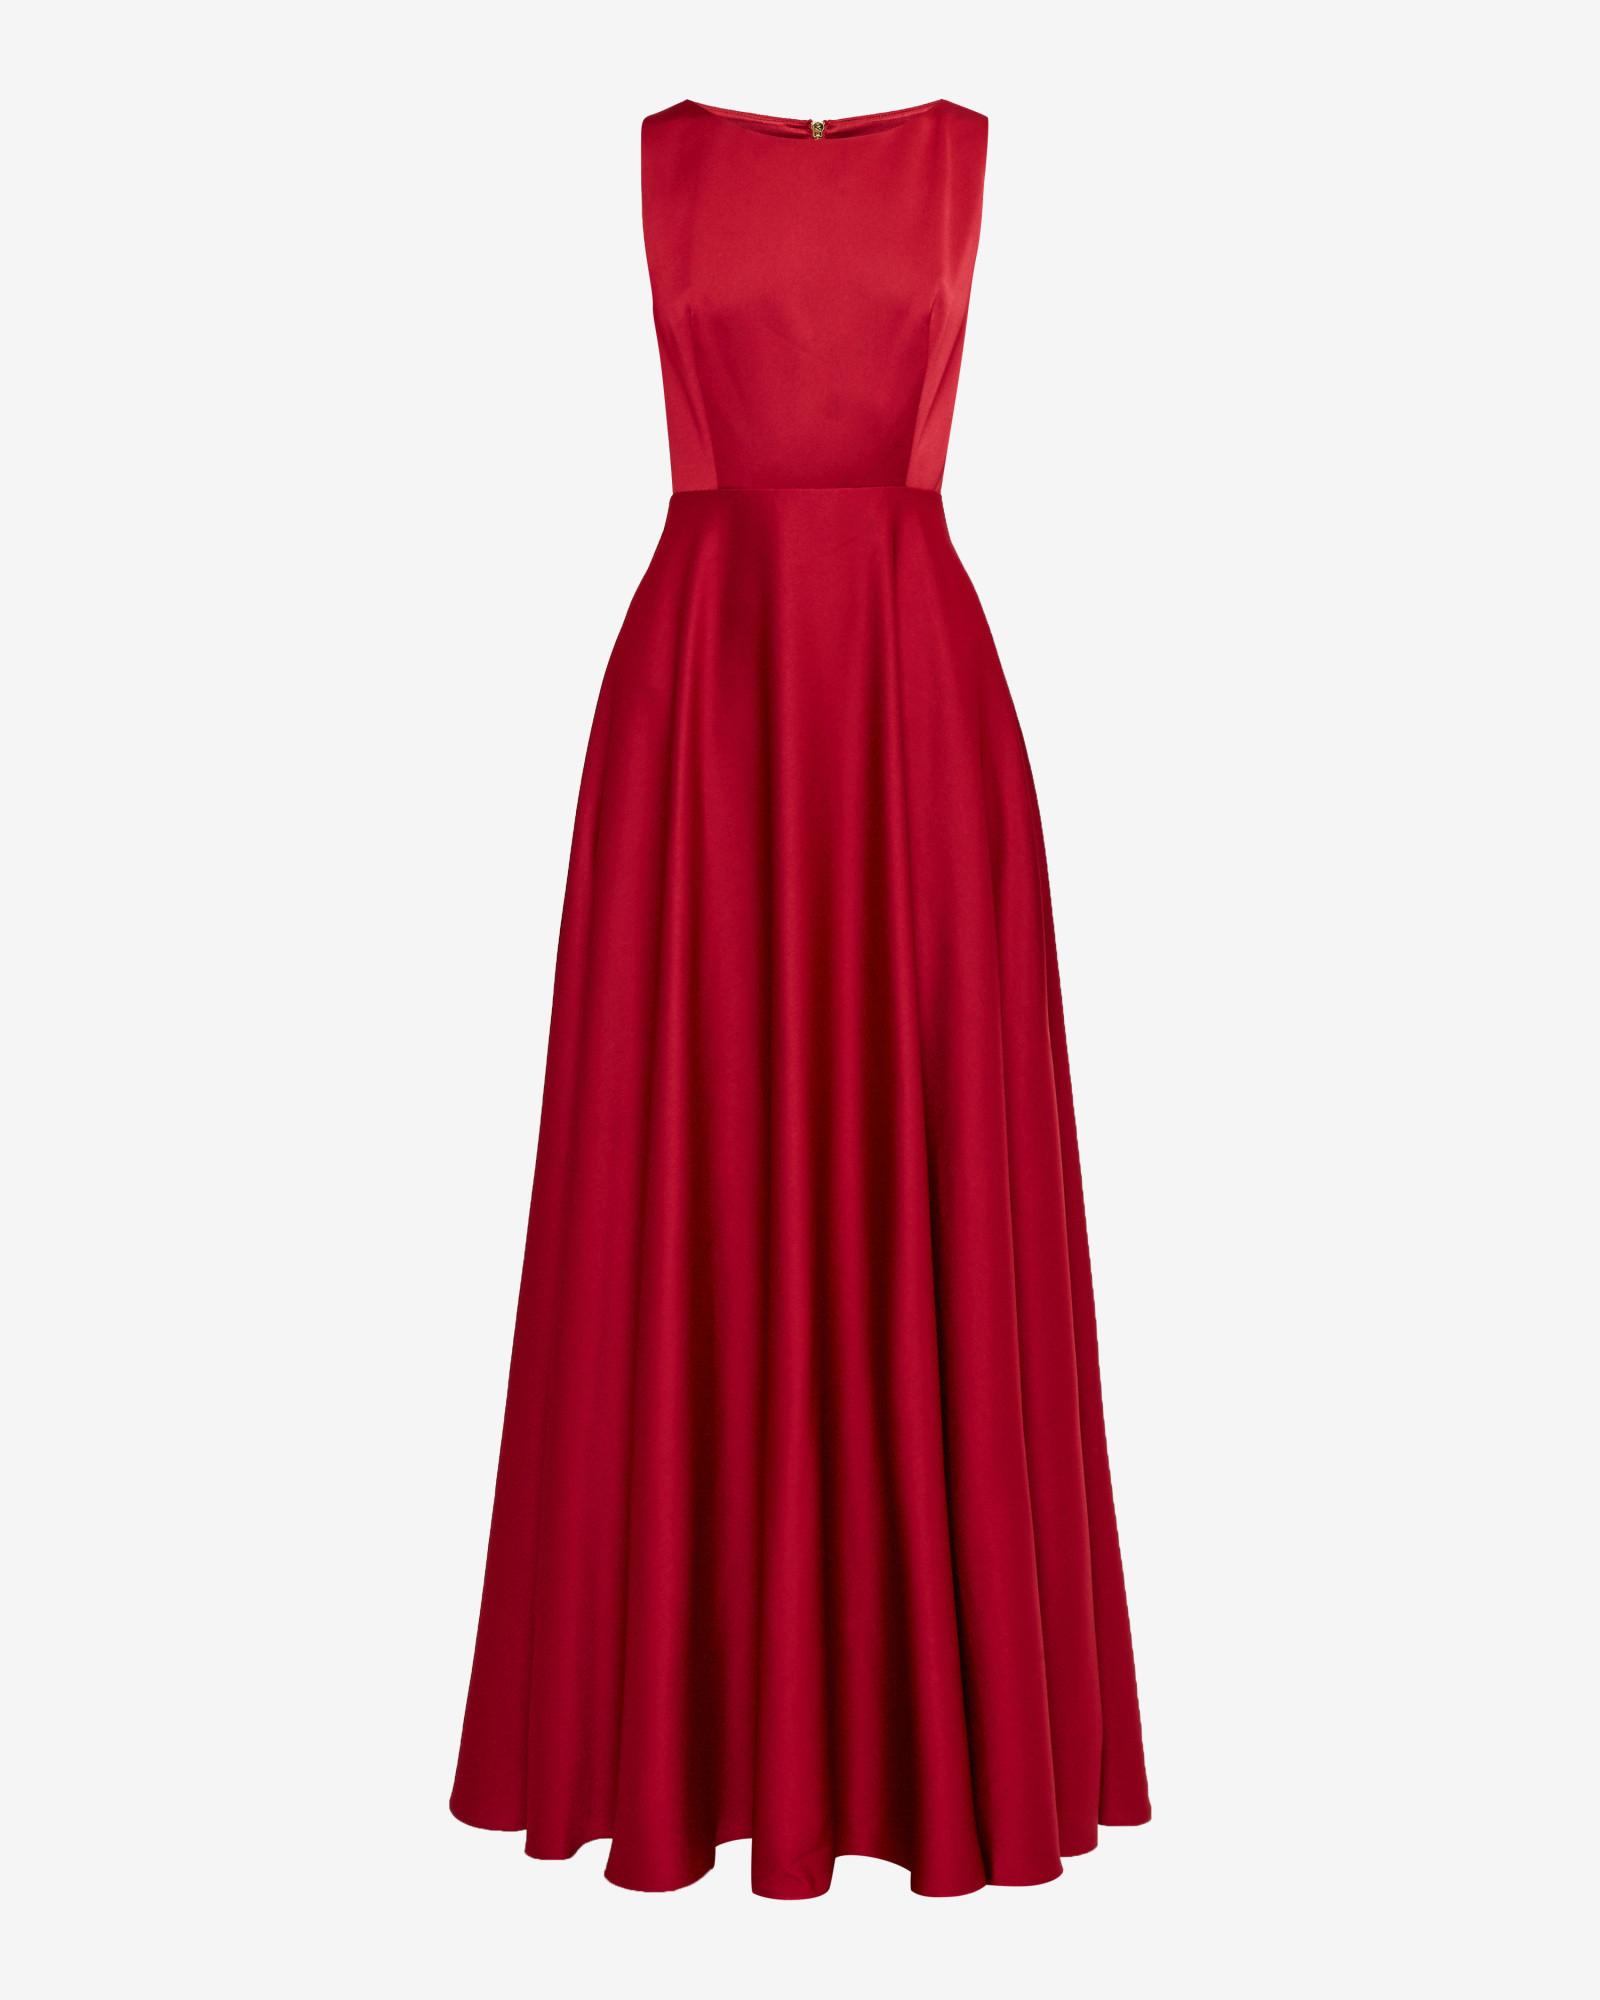 Ted Baker Synthetic Cut-out Maxi Dress in Bright Red (Red) - Lyst